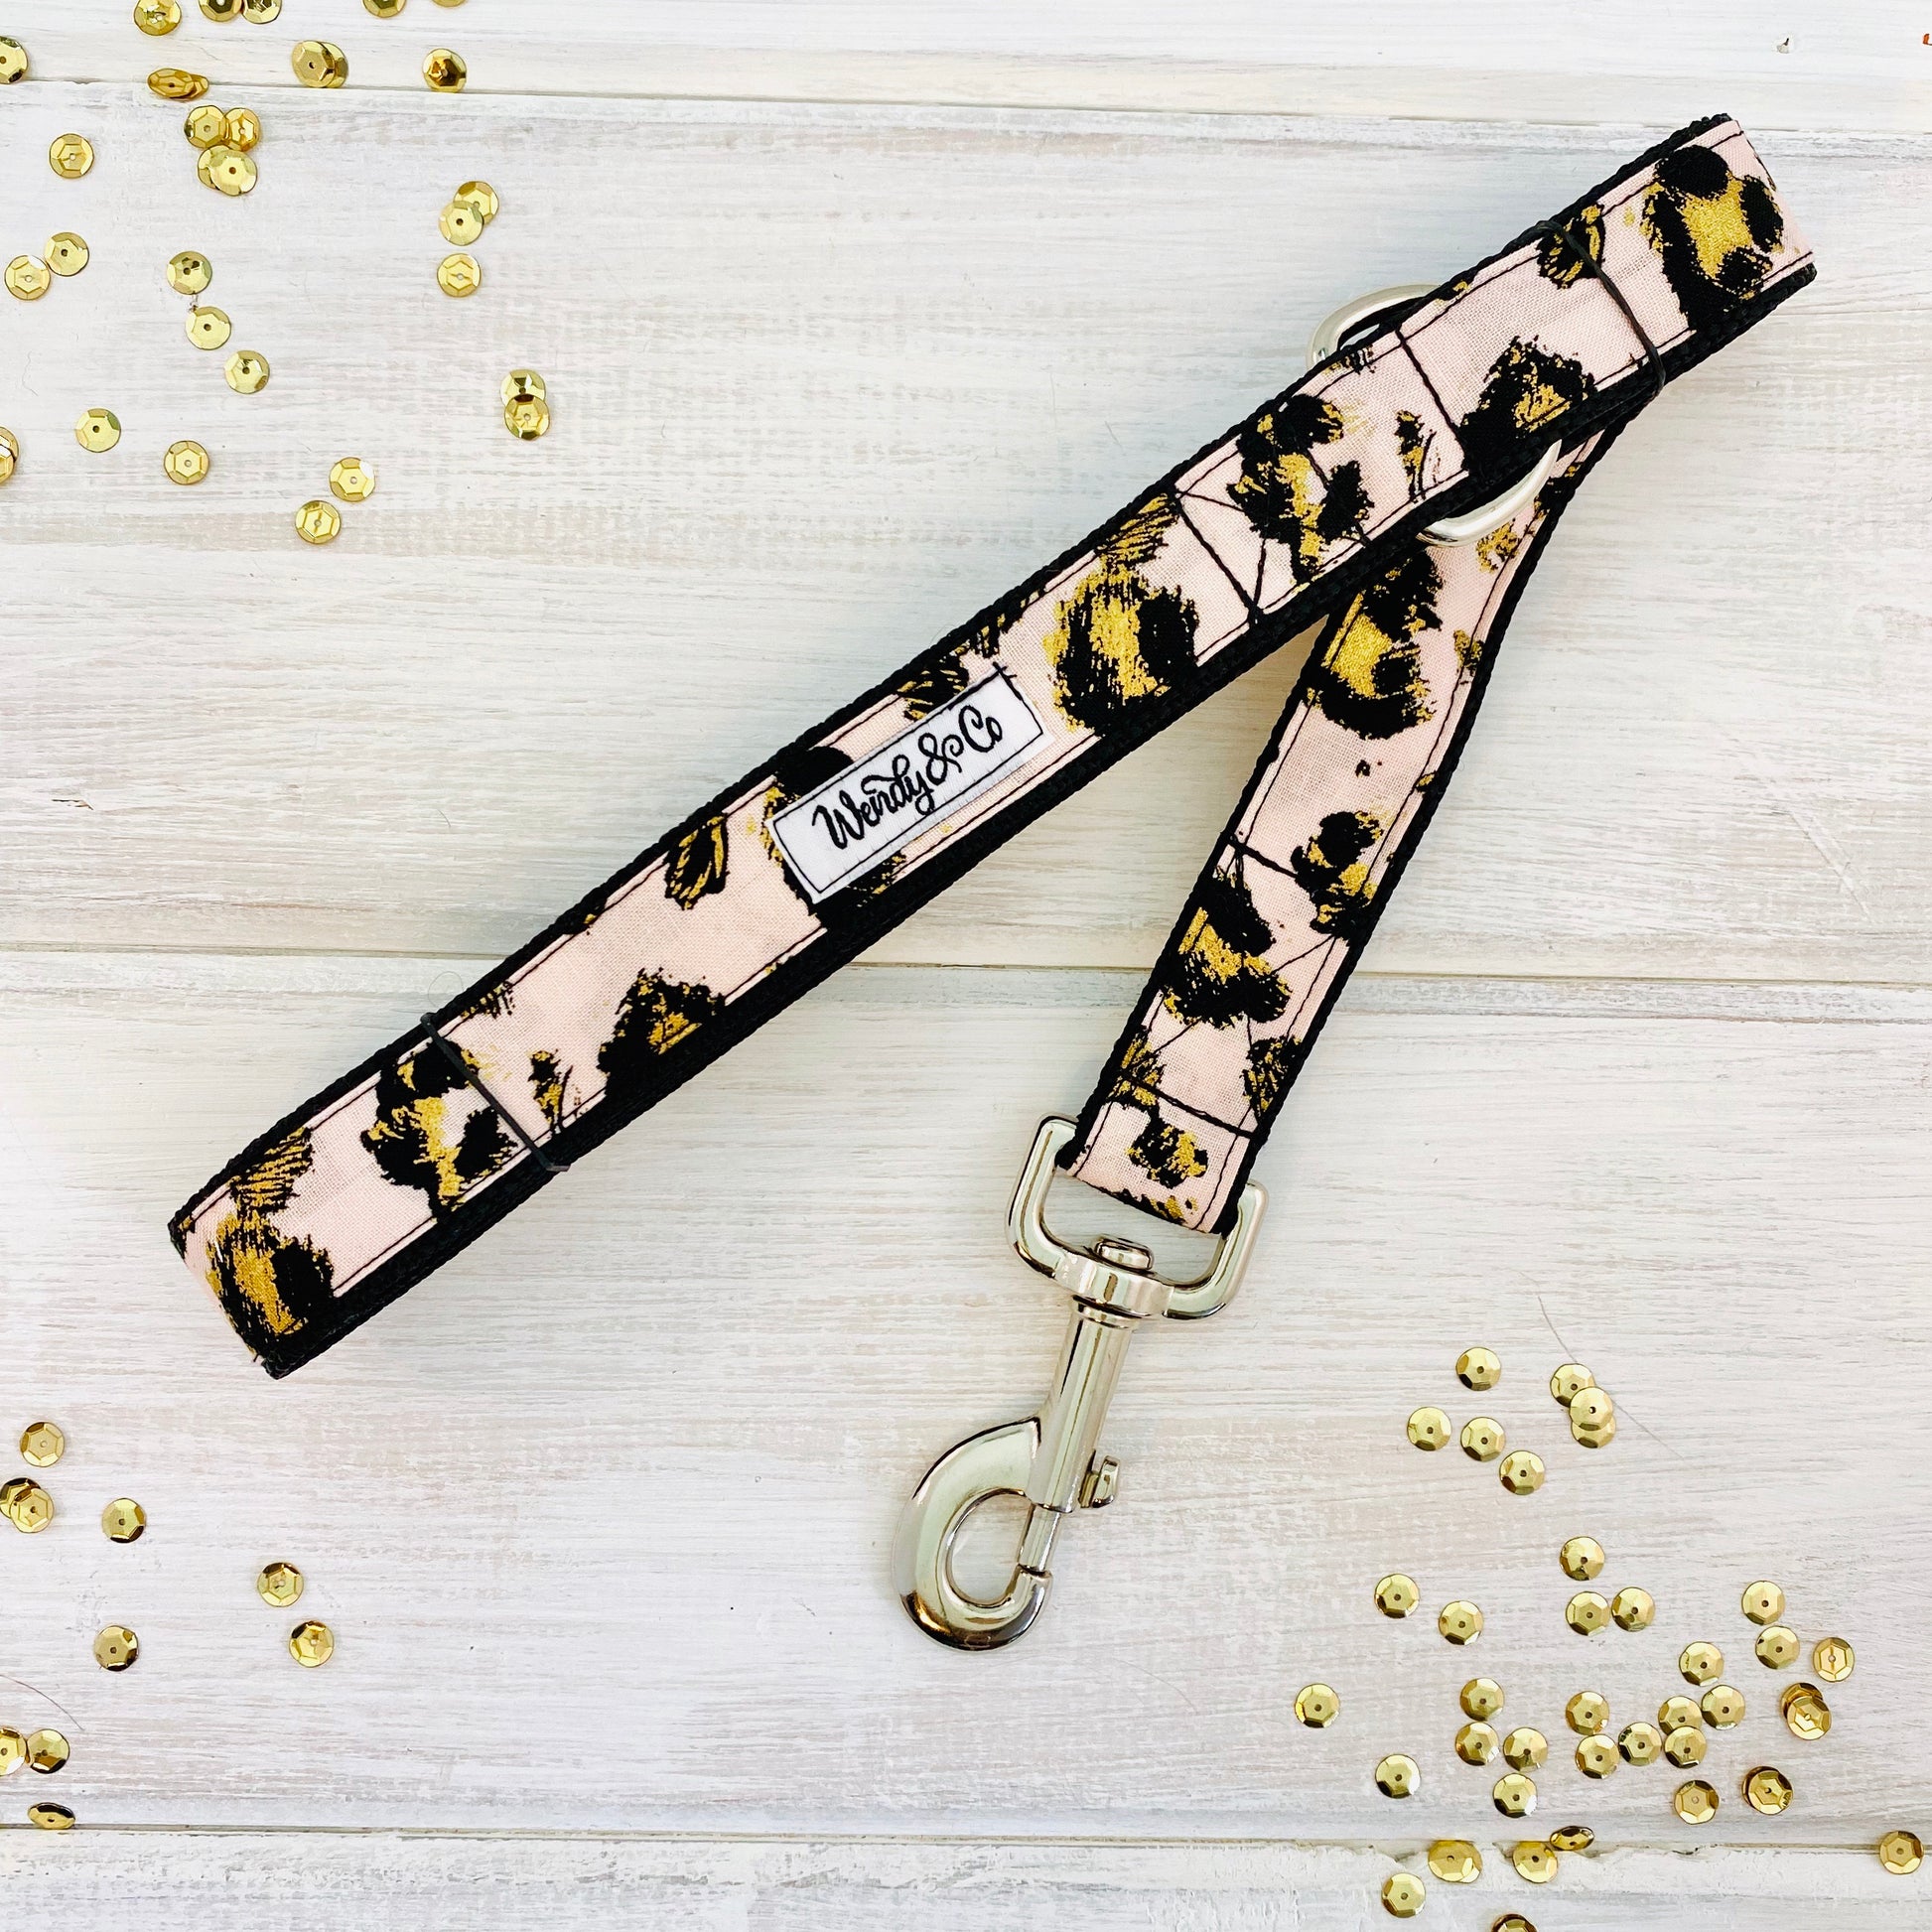 Blush pink cheetah animal print fabric with black and gold accents pet leash, 6' dog leash handmade.